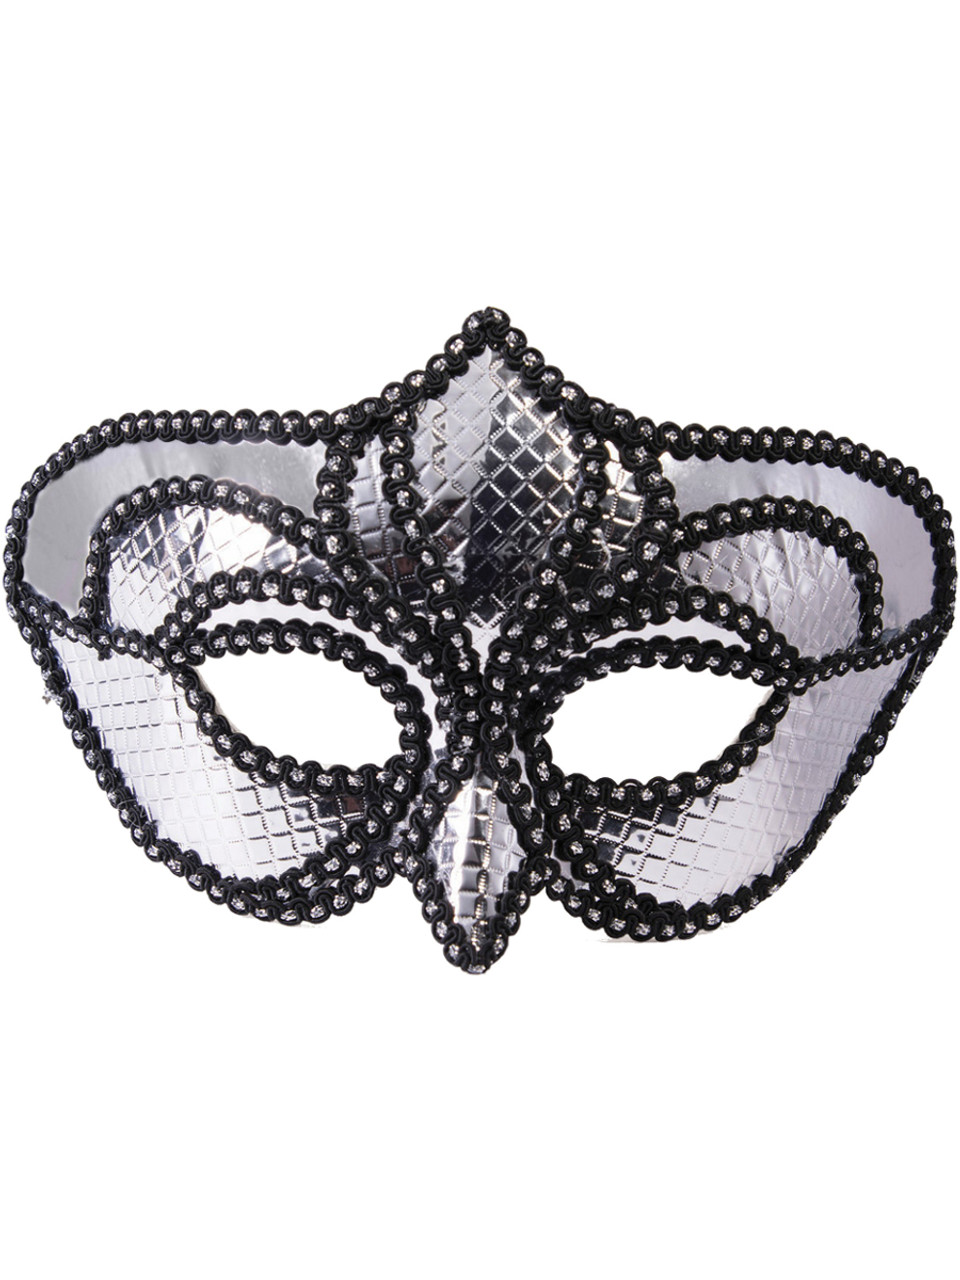 Carnival Mask - Sequin and Feathers - White - VENETIAN MASKS